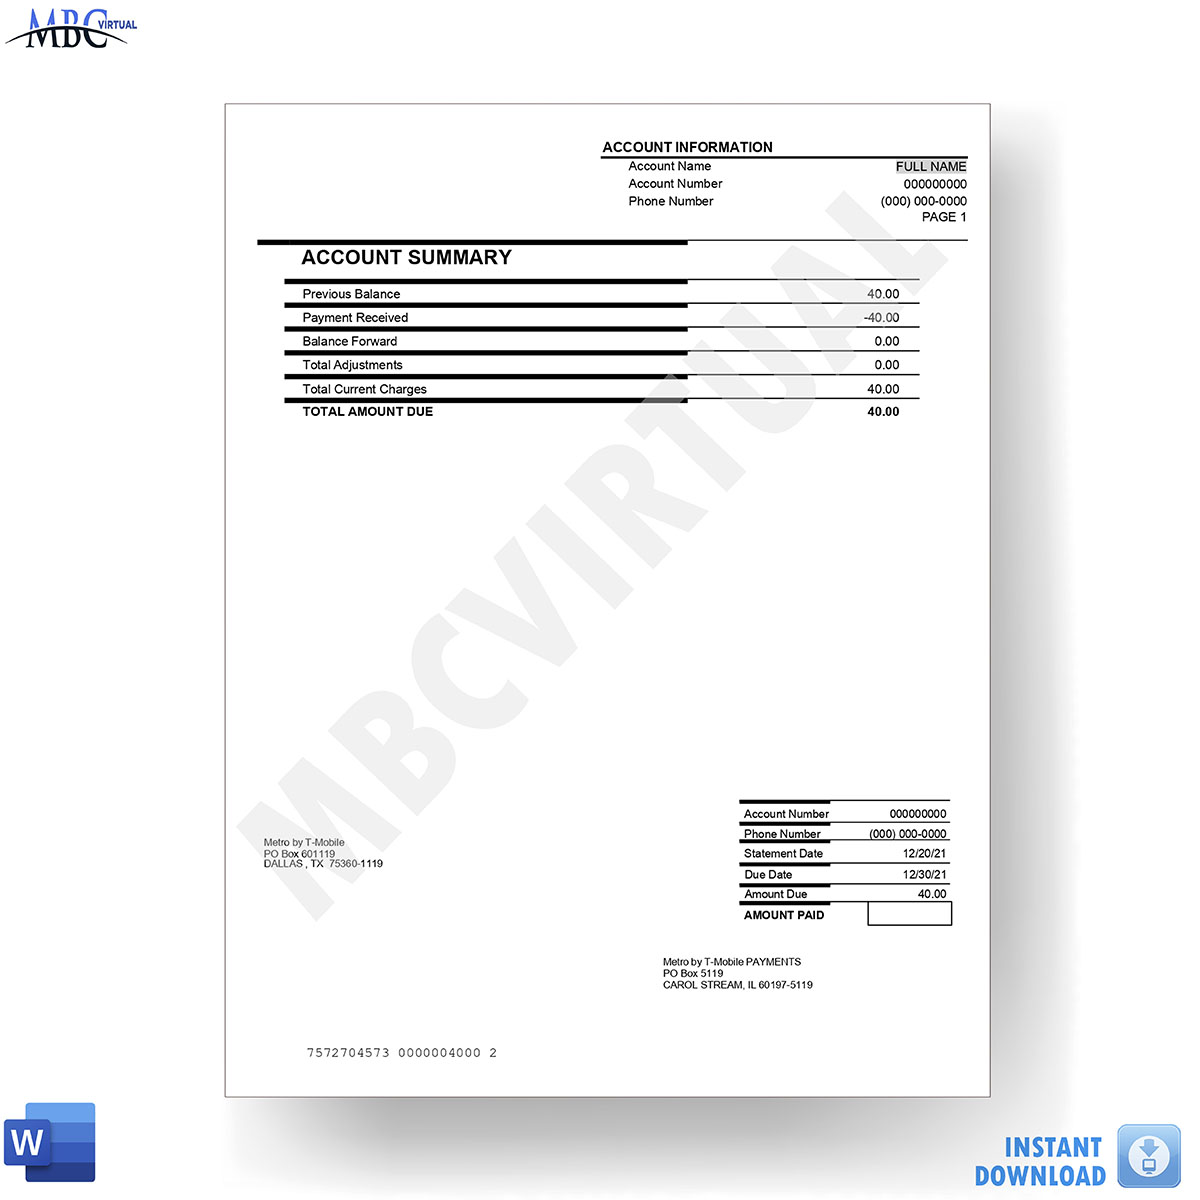 New 2023 Metro By TMobile Bill Statement Template MbcVirtual